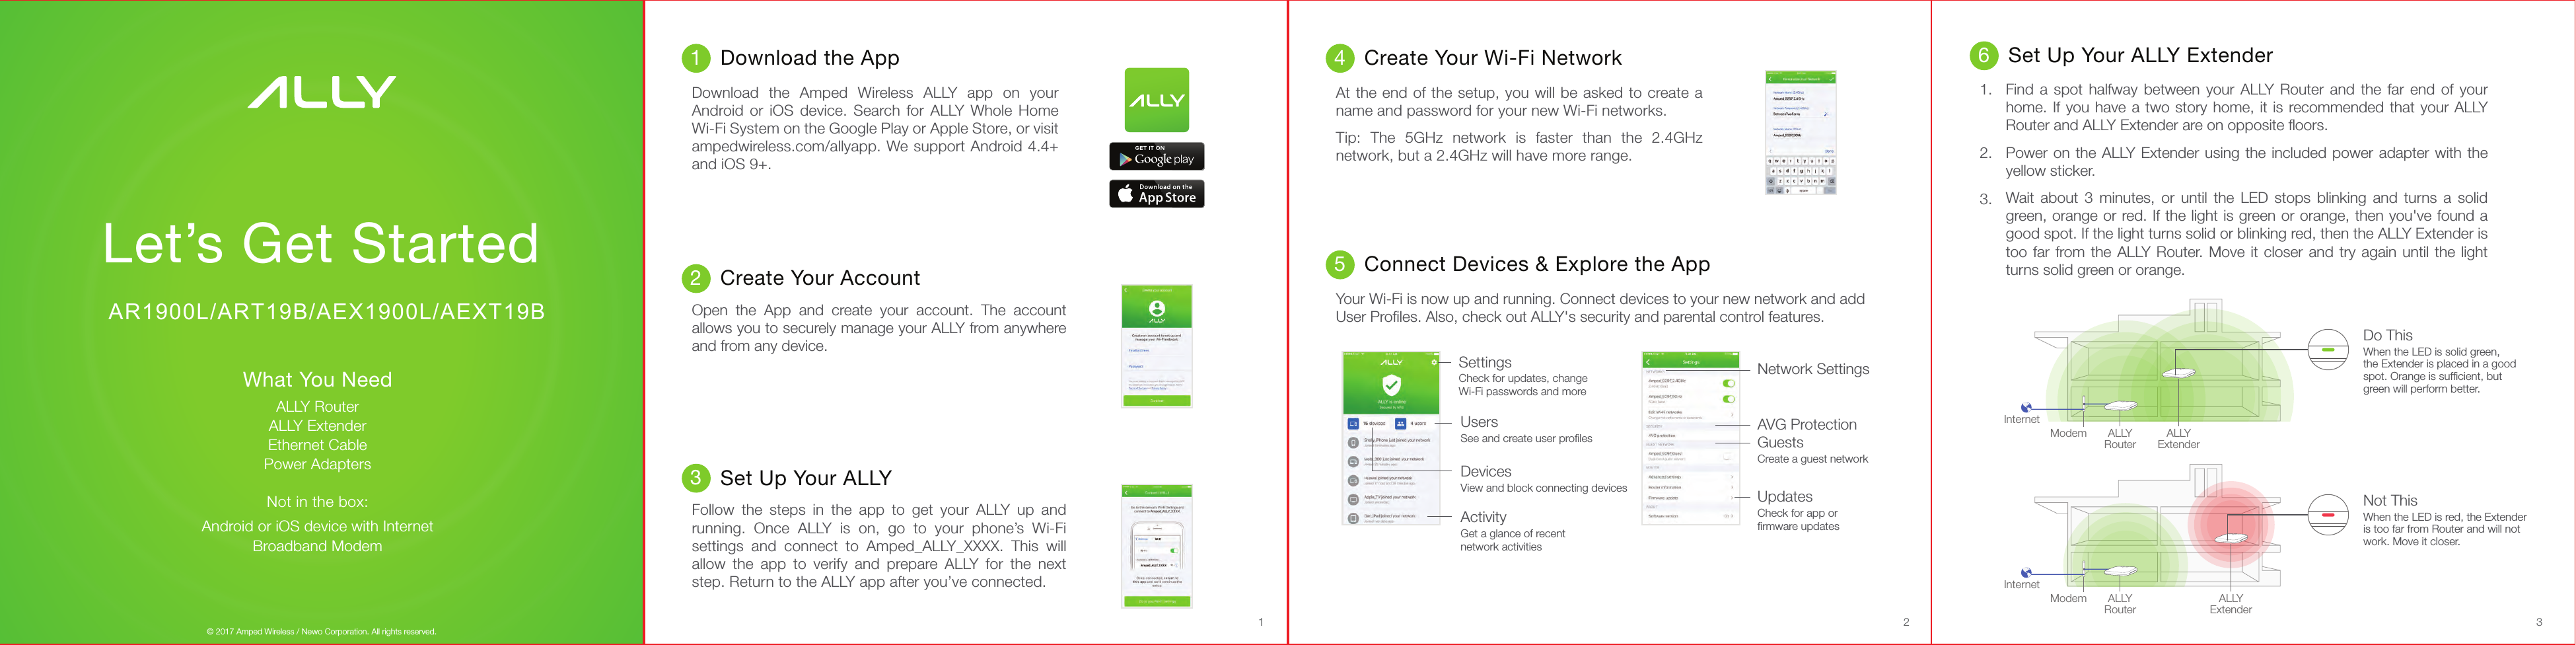 Set Up Your ALLYFollow  the  steps  in  the  app  to  get  your  ALLY  up  and running.  Once  ALLY  is  on,  go  to  your  phone’s  Wi-Fi settings  and  connect  to  Amped_ALLY_XXXX.  This  will allow  the  app  to  verify  and  prepare  ALLY  for  the  next step. Return to the ALLY app after you’ve connected.ModemInternetALLYRouter ALLYExtenderCreate Your Account Open  the  App  and  create  your  account.  The  account allows you to securely manage your ALLY from anywhere and from any device.SettingsCheck for updates, change Wi-Fi passwords and moreUsersSee and create user proﬁlesDevicesView and block connecting devicesNetwork SettingsAVG ProtectionGuestsCreate a guest networkUpdatesCheck for app orﬁrmware updatesActivityGet a glance of recentnetwork activitiesLet’s Get Started1 2 3What You NeedALLY RouterALLY ExtenderEthernet CablePower AdaptersNot in the box:Android or iOS device with InternetBroadband Modem23Download the AppDownload  the  Amped  Wireless  ALLY  app  on  your Android or  iOS  device. Search for  ALLY Whole  Home Wi-Fi System on the Google Play or Apple Store, or visit ampedwireless.com/allyapp. We support Android 4.4+ and iOS 9+.1Create Your Wi-Fi NetworkAt the end of the setup, you will be asked to create a name and password for your new Wi-Fi networks.Tip:  The  5GHz  network  is  faster  than  the  2.4GHz network, but a 2.4GHz will have more range.4Set Up Your ALLY ExtenderFind  a  spot  halfway  between  your  ALLY Router  and the  far end  of your home. If you have a two story home, it is recommended that your ALLY Router and ALLY Extender are on opposite ﬂoors.Power on the ALLY Extender using the included  power adapter with the yellow sticker.Wait  about  3  minutes,  or  until  the  LED  stops  blinking  and  turns  a  solid green, orange or red. If the light is green or orange, then you&apos;ve found a good spot. If the light turns solid or blinking red, then the ALLY Extender is too far from the ALLY Router. Move  it  closer  and try  again  until  the light turns solid green or orange.1.2.3.6Connect Devices &amp; Explore the AppYour Wi-Fi is now up and running. Connect devices to your new network and add User Proﬁles. Also, check out ALLY&apos;s security and parental control features.5ModemInternetALLYRouter ALLYExtenderDo ThisWhen the LED is solid green, the Extender is placed in a good spot. Orange is sufﬁcient, but green will perform better.Not ThisWhen the LED is red, the Extender is too far from Router and will notwork. Move it closer.© 2017 Amped Wireless / Newo Corporation. All rights reserved.AR1900L/ART19B/AEX1900L/AEXT19B